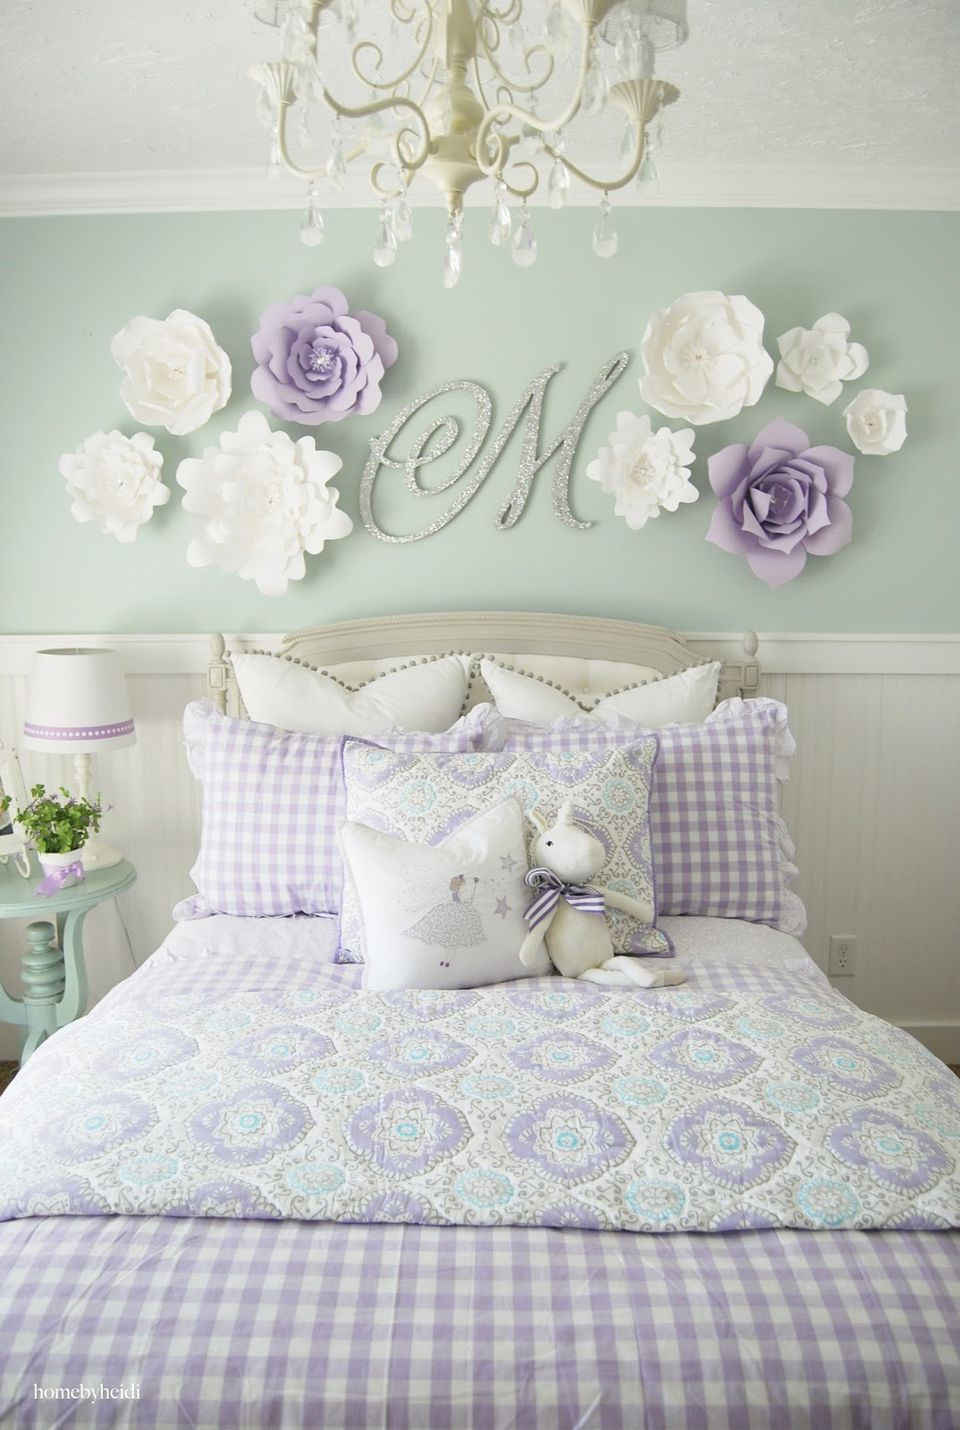 Wall Art For Girls Bedrooms
 24 Wall Decor Ideas for Girls Rooms